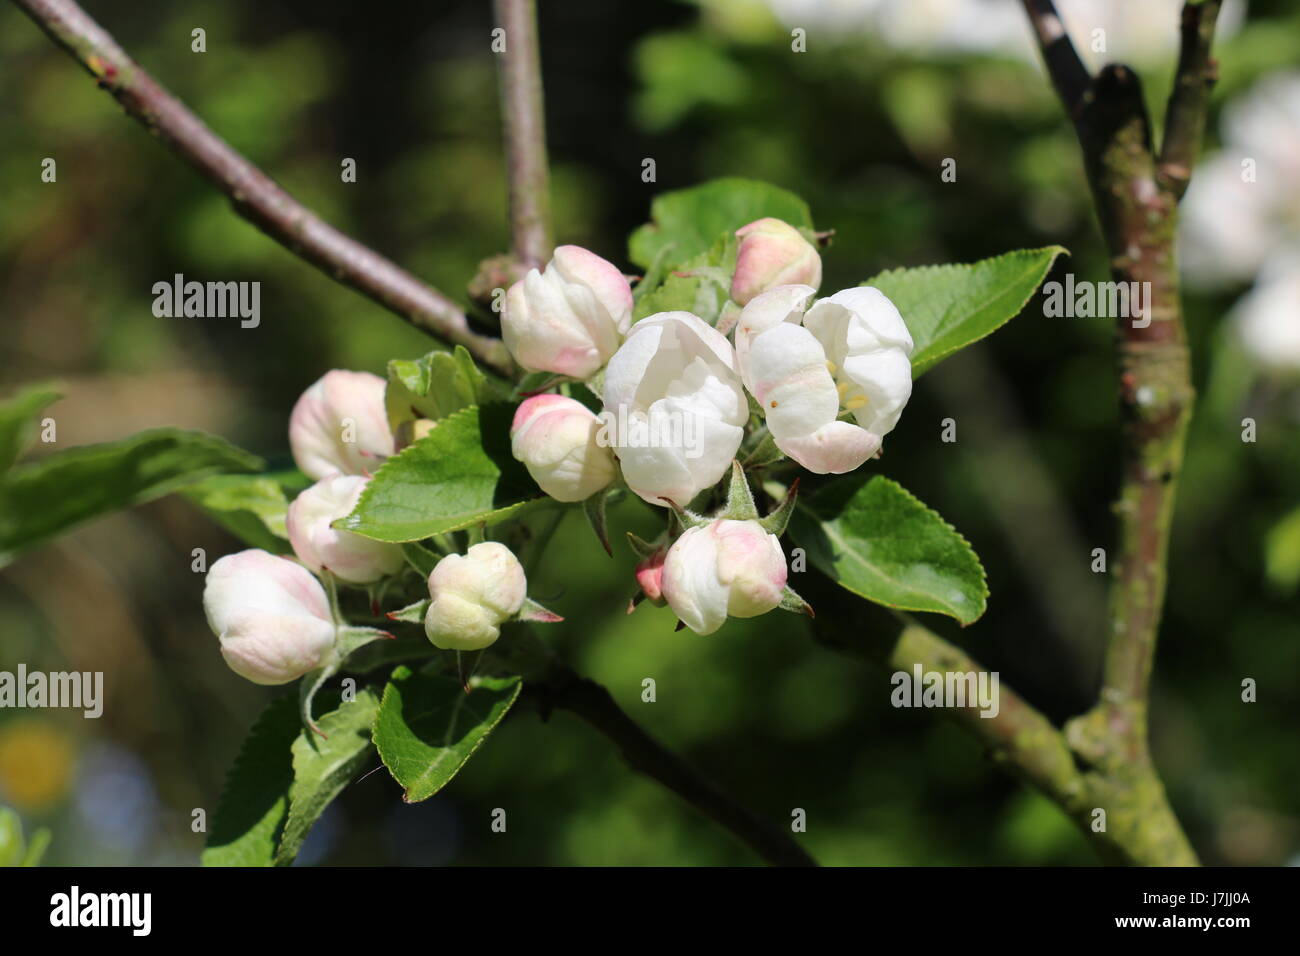 Cluster of white and pink Discovery Apple Blossom buds opening in the Spring sunshine in Shropshire, England Stock Photo